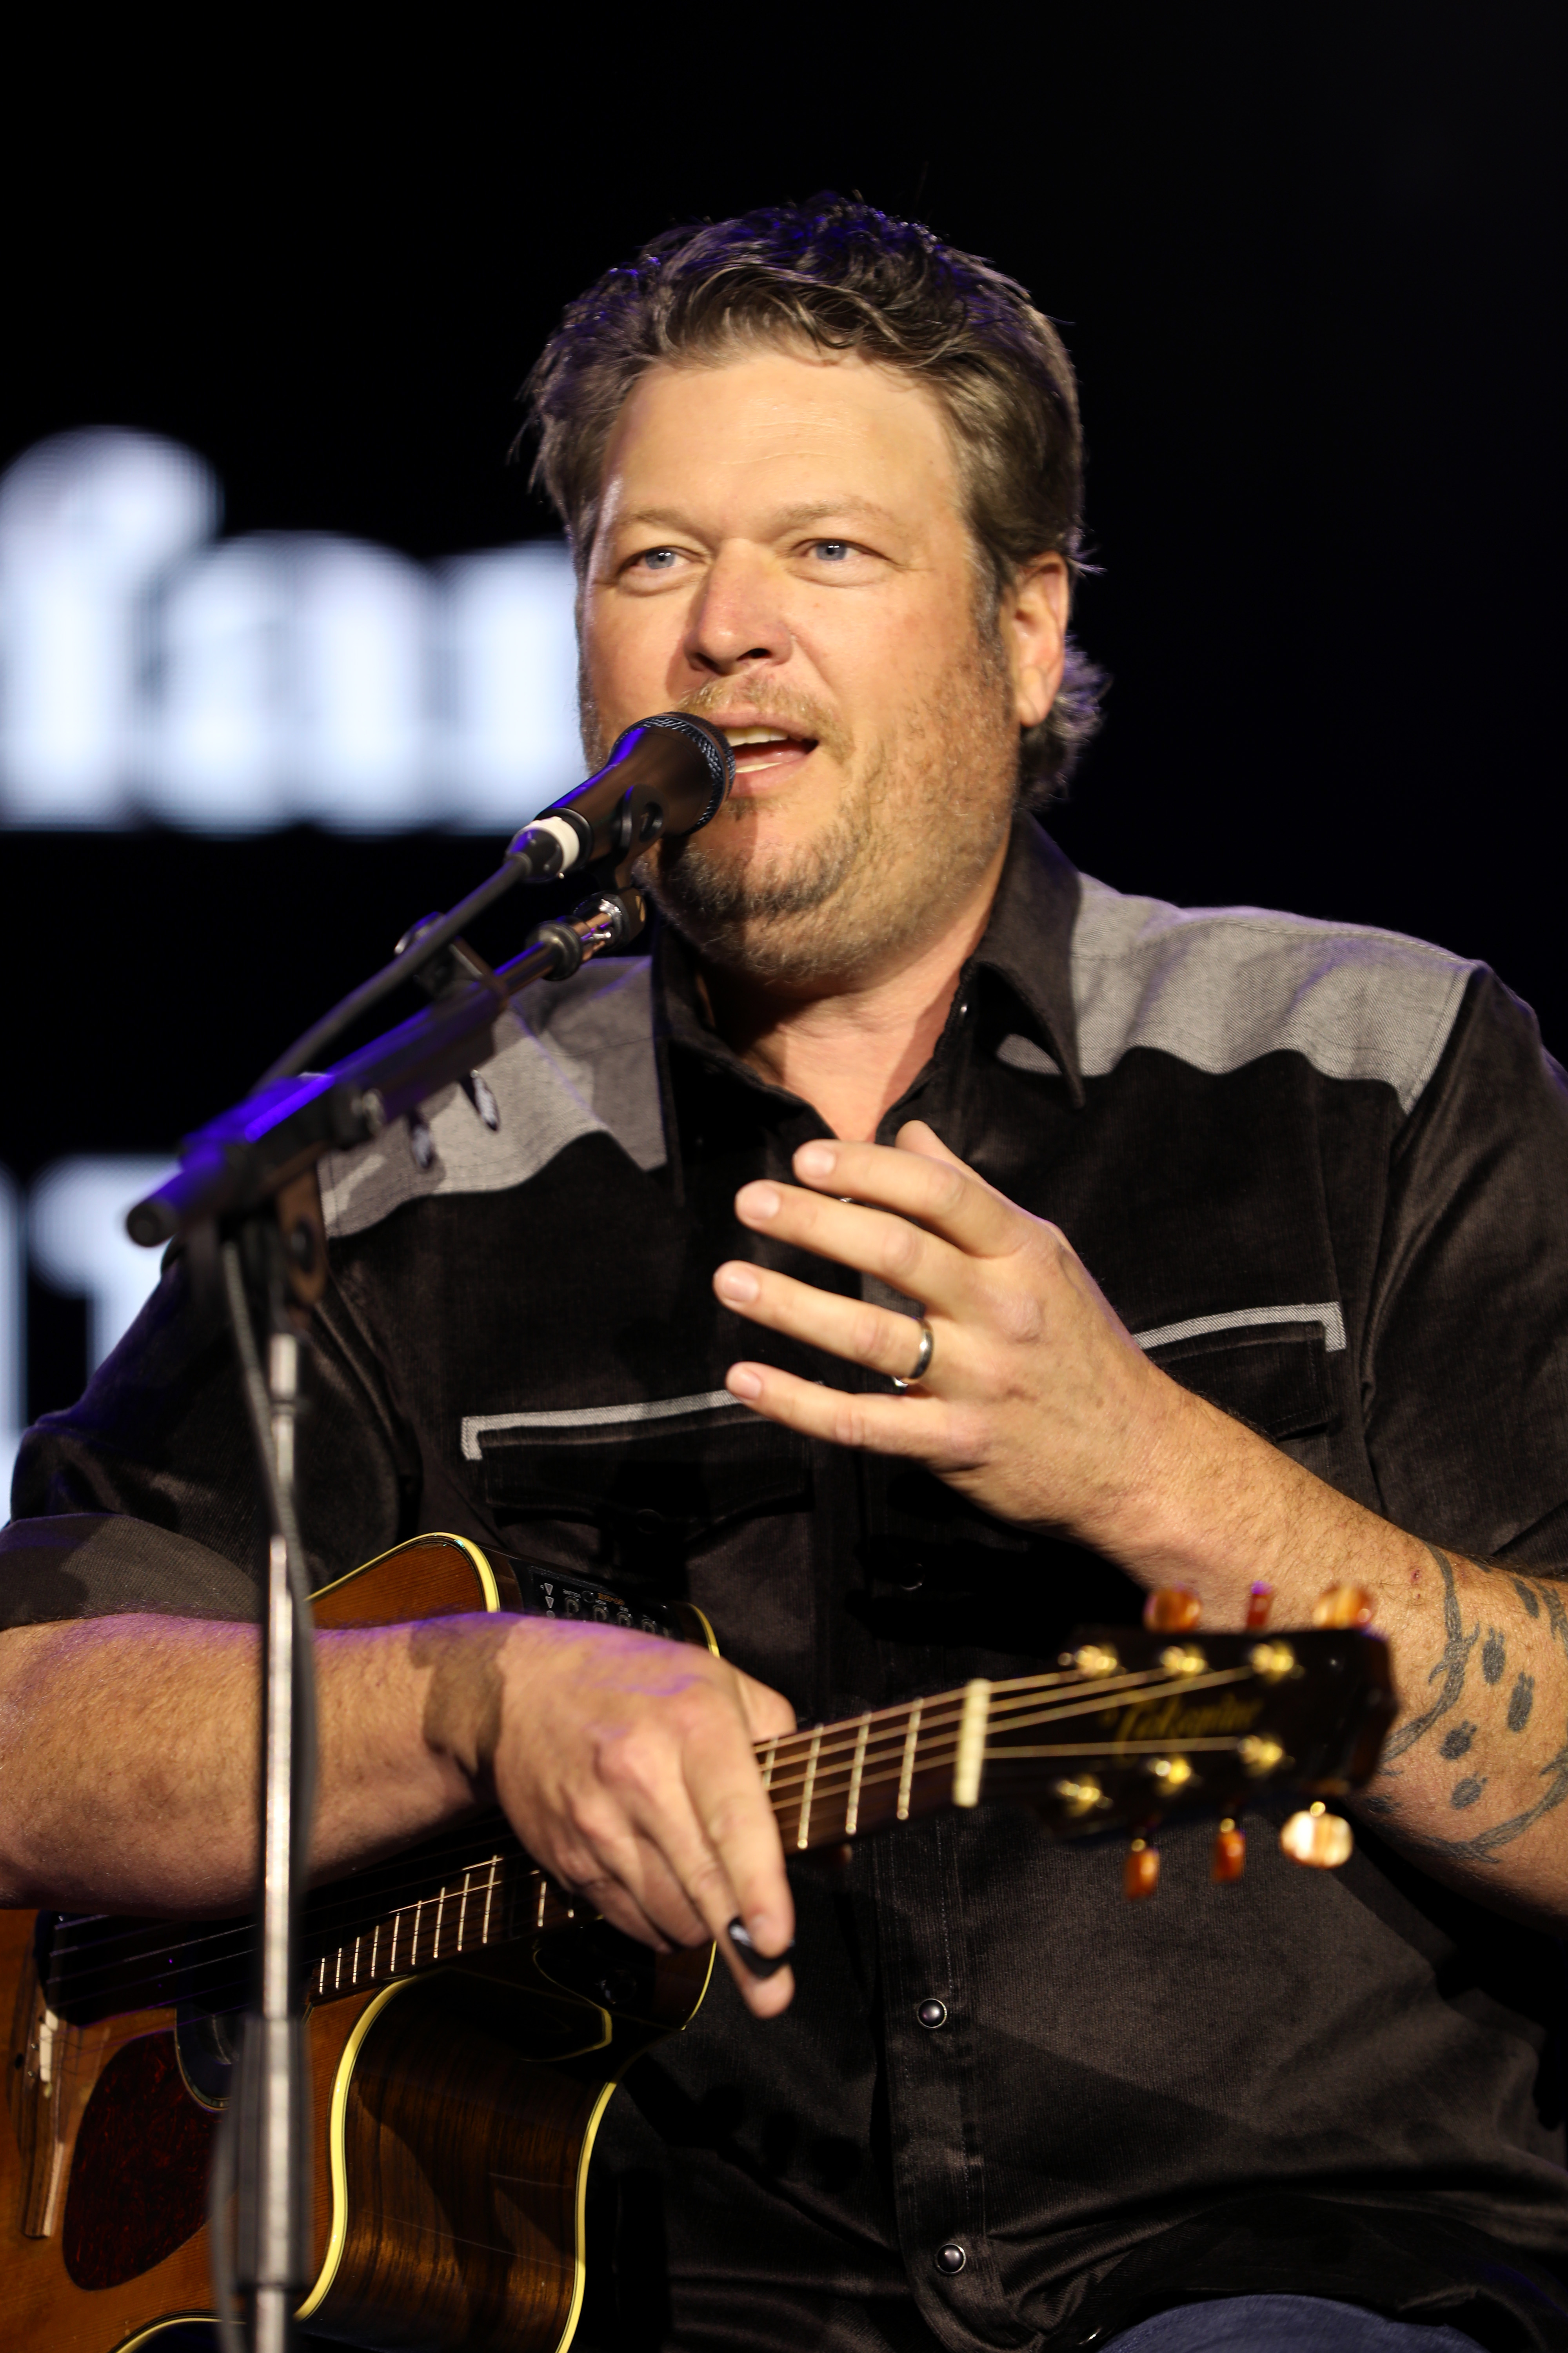 Blake kicked off his nationwide tour in February and it wraps in Wichita, Kansas, this week